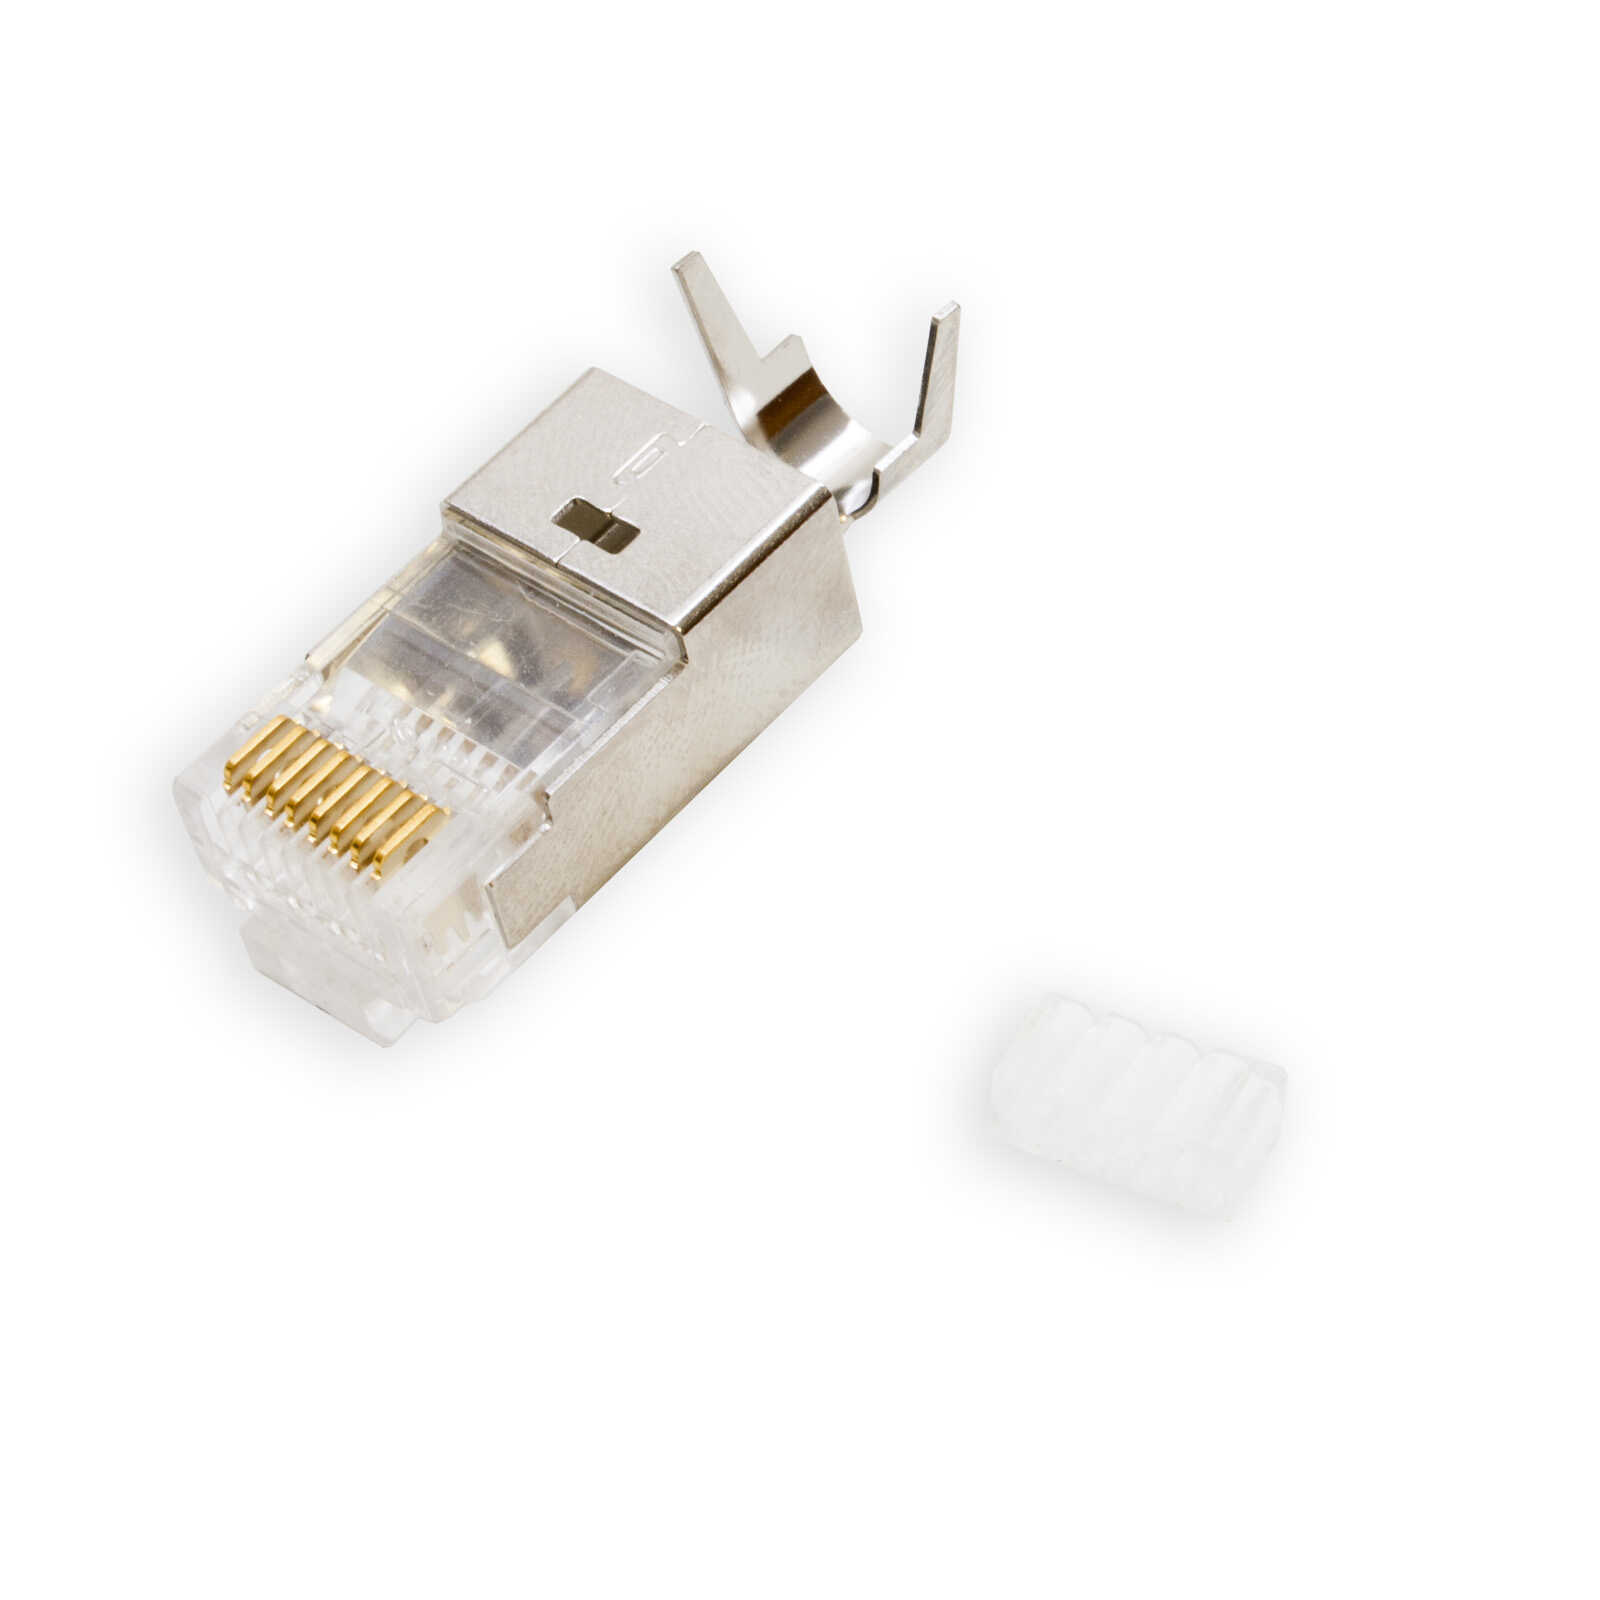 Oversize CAT6a RJ45 Connector Plug. 26-22AWG solid or stranded cables.  1.5mm OD